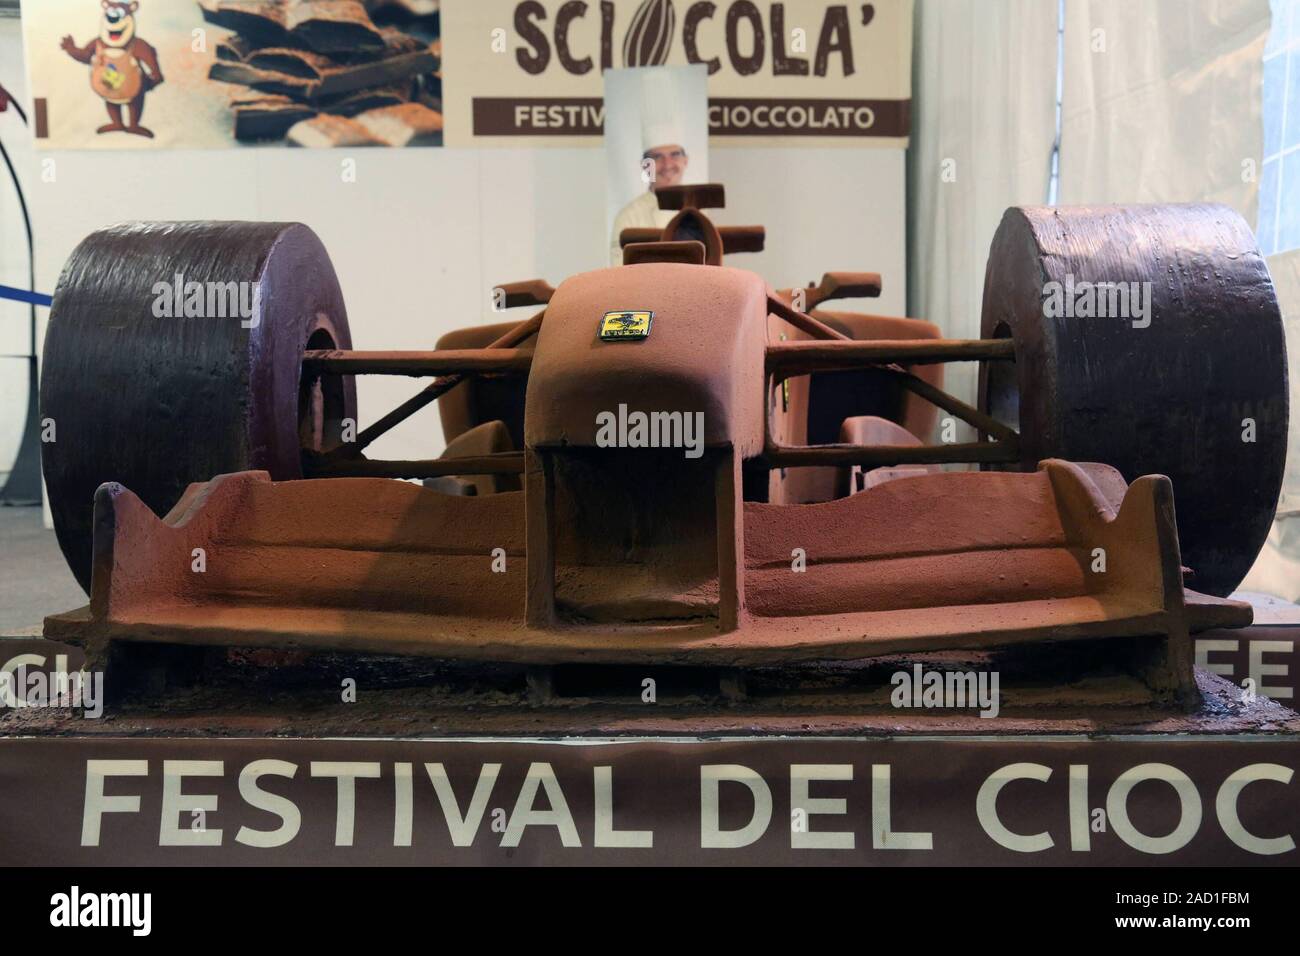 Modena. A reproduction of the Ferrari F2004, the most successful car driven by Michael Schumacher, created by the chocolate master Mirco Della Vecchia to honor the German driver, on display in the Sciocola event Editorial Usage Only Where: Modena When: 02 Nov 2019 Credit: IPA/WENN.com  **Only available for publication in UK, USA, Germany, Austria, Switzerland** Stock Photo